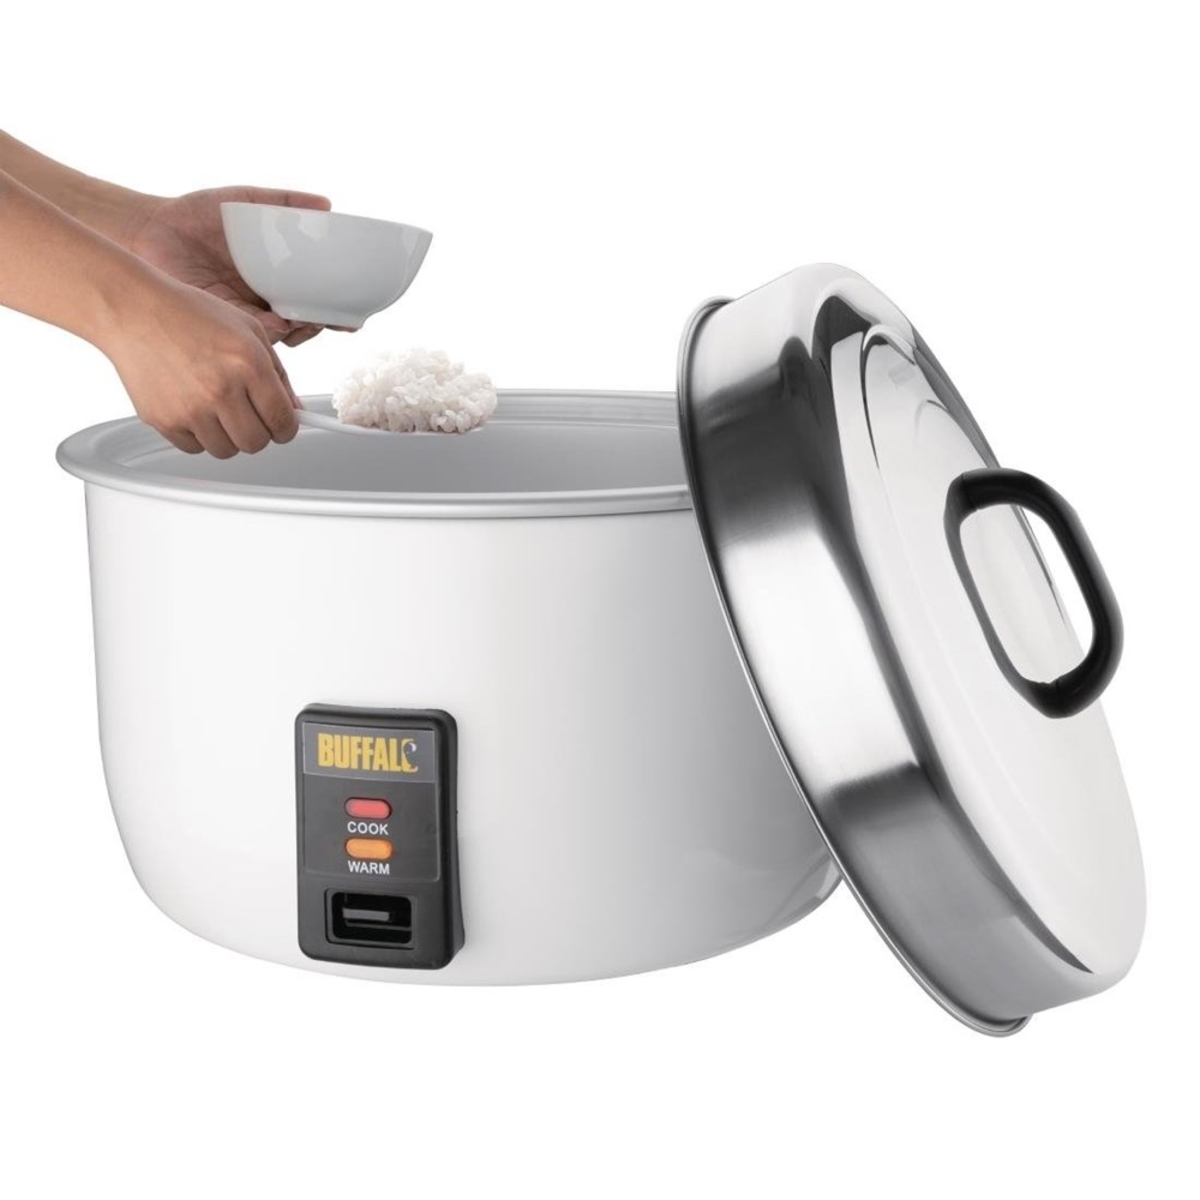 Buffalo Titanium Grey IH SMART COOKER, Rice Cooker and Warmer, 1.8L, 10  cups of rice, Non-Coating inner pot, Efficient, Multiple function,  Induction